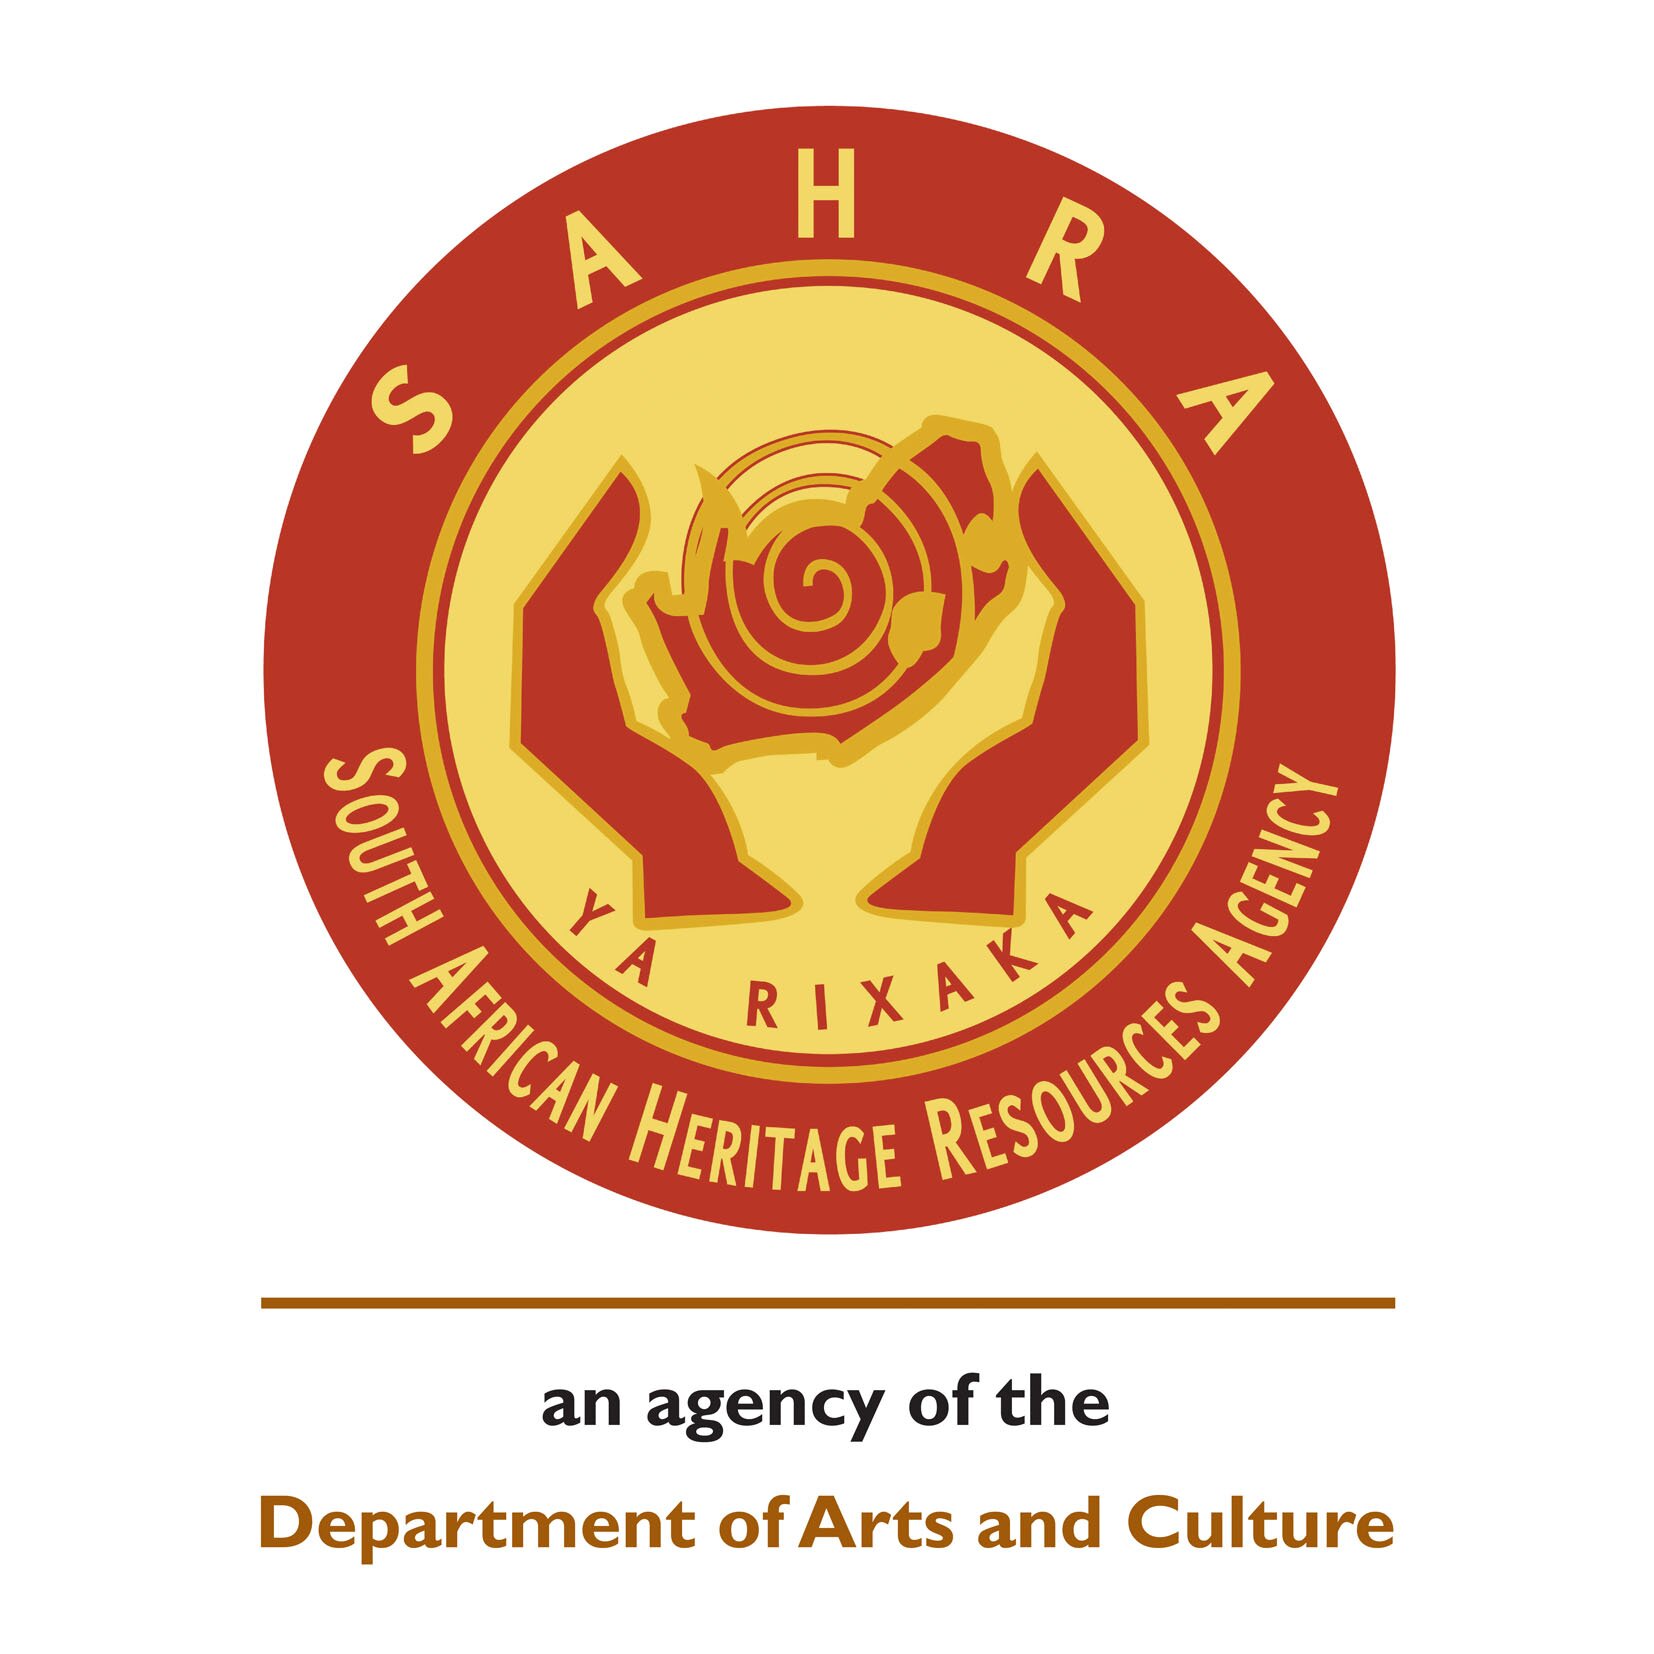 SAHRA is mandated to coordinate the identification and management of the national estate.